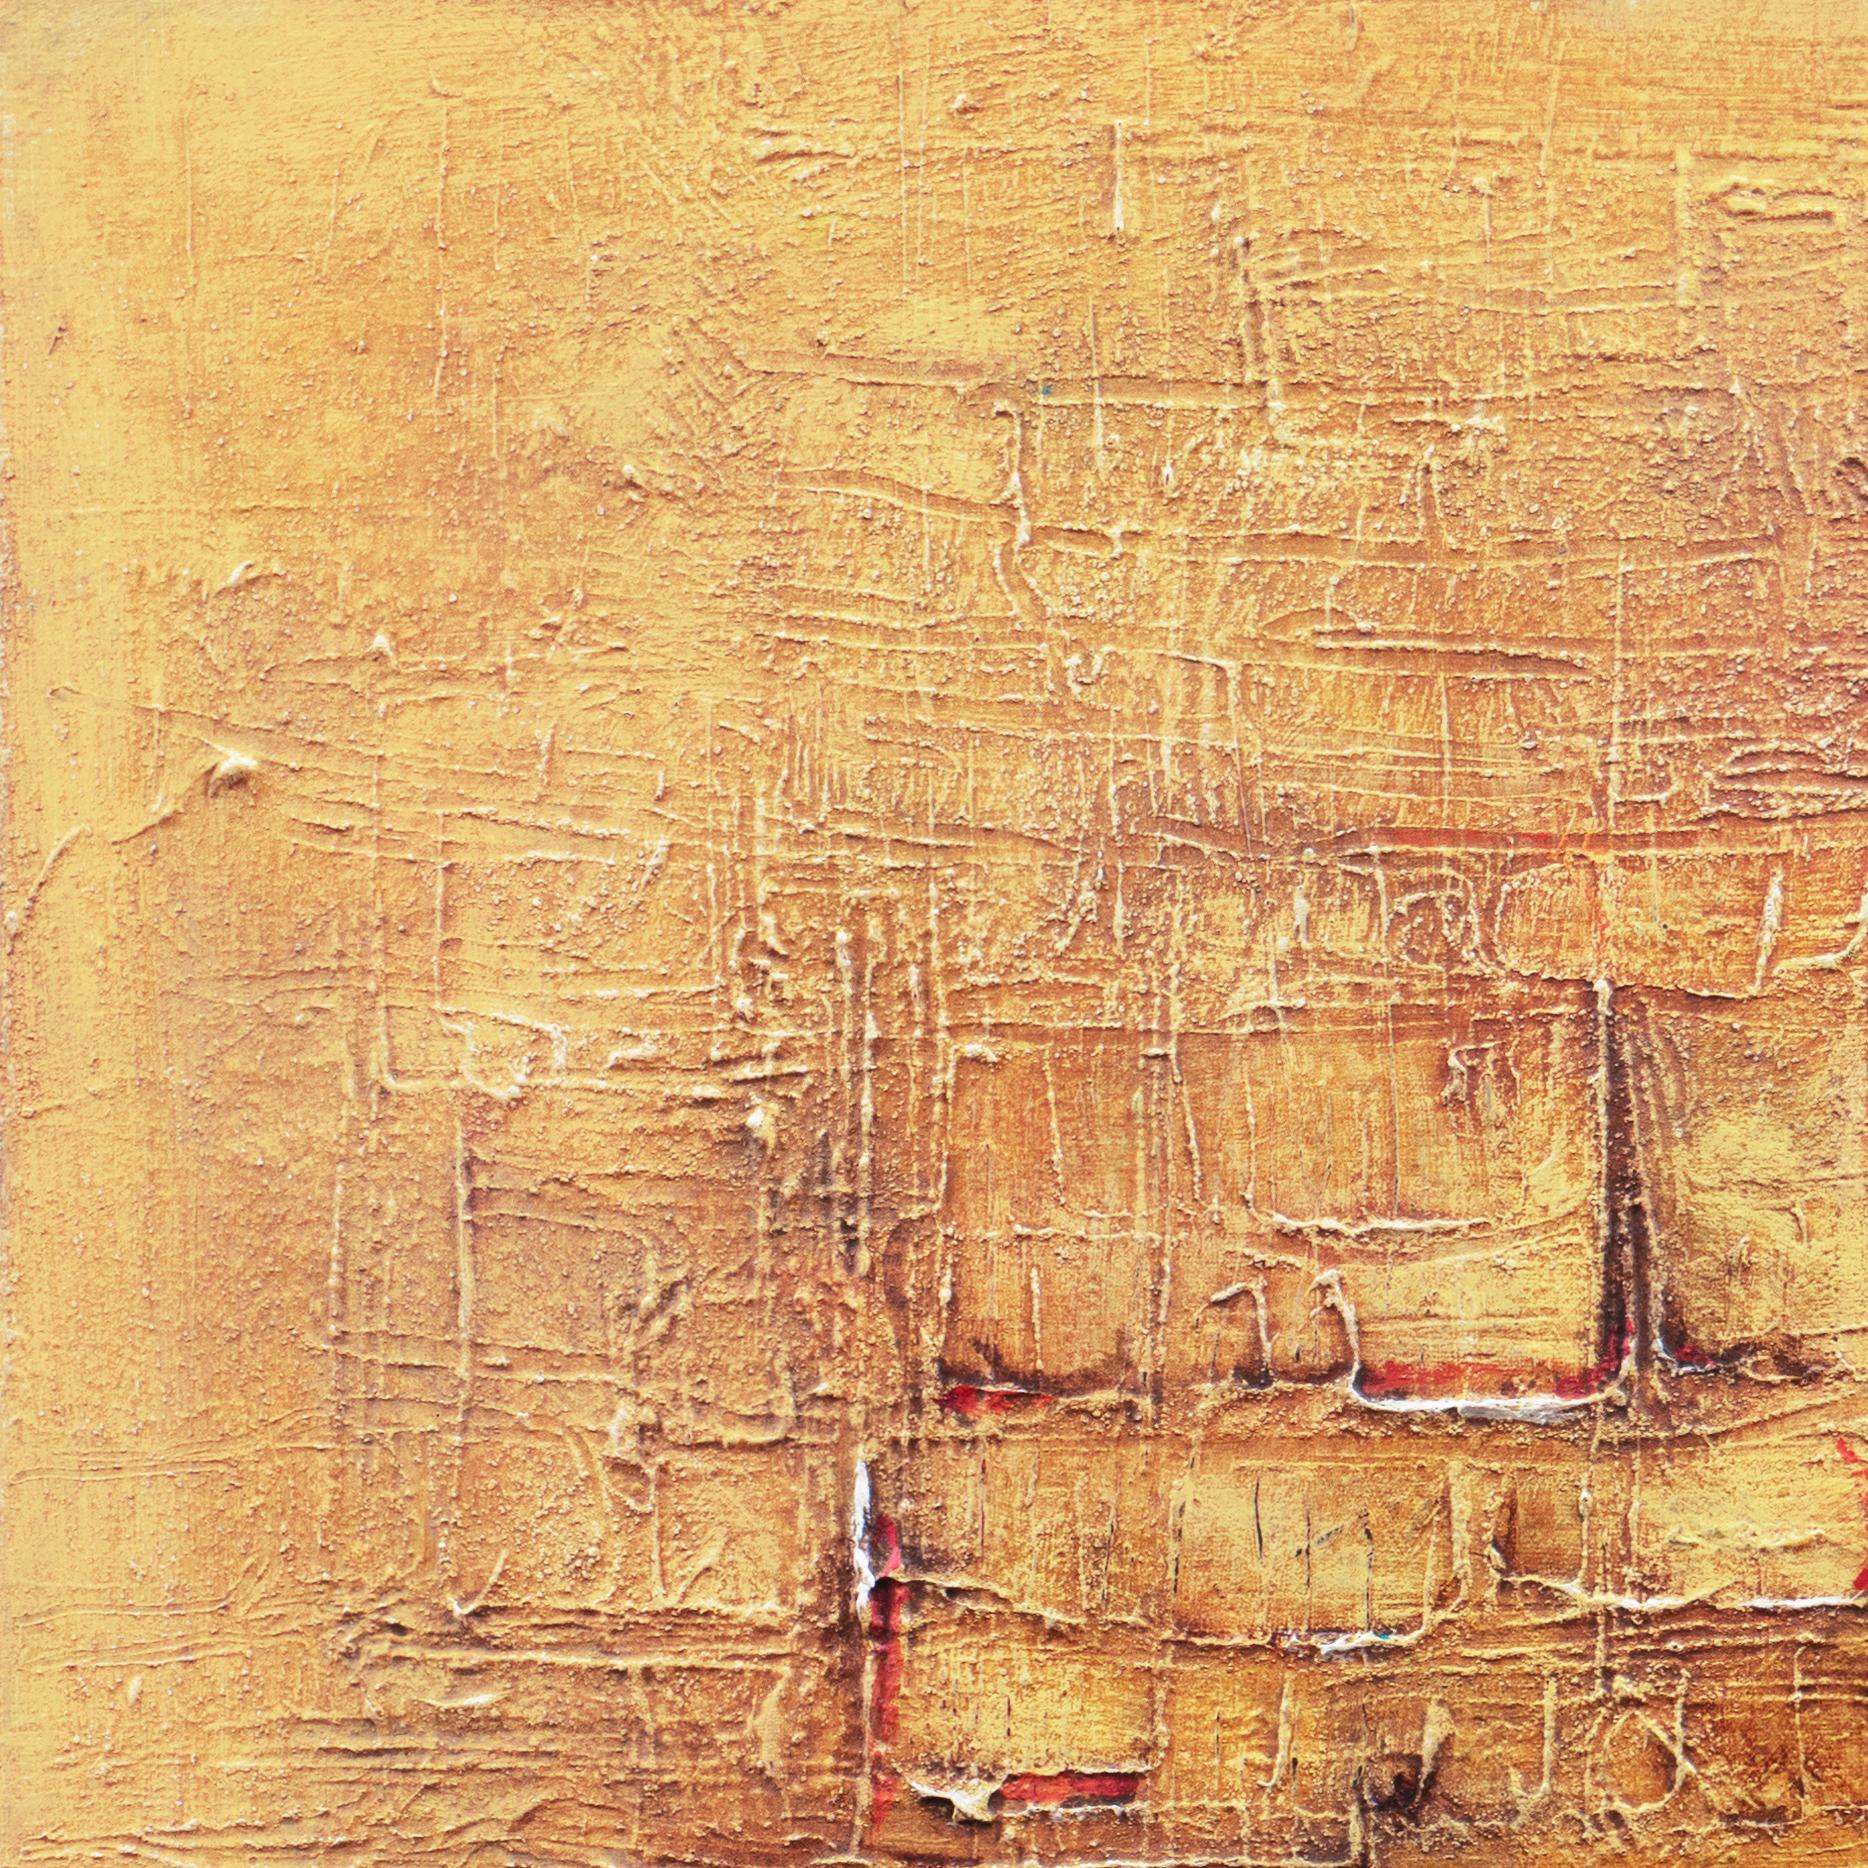 'Composition in Ochre and Saffron',  San Francisco Bay Area Abstraction - Orange Abstract Painting by V. Tharos